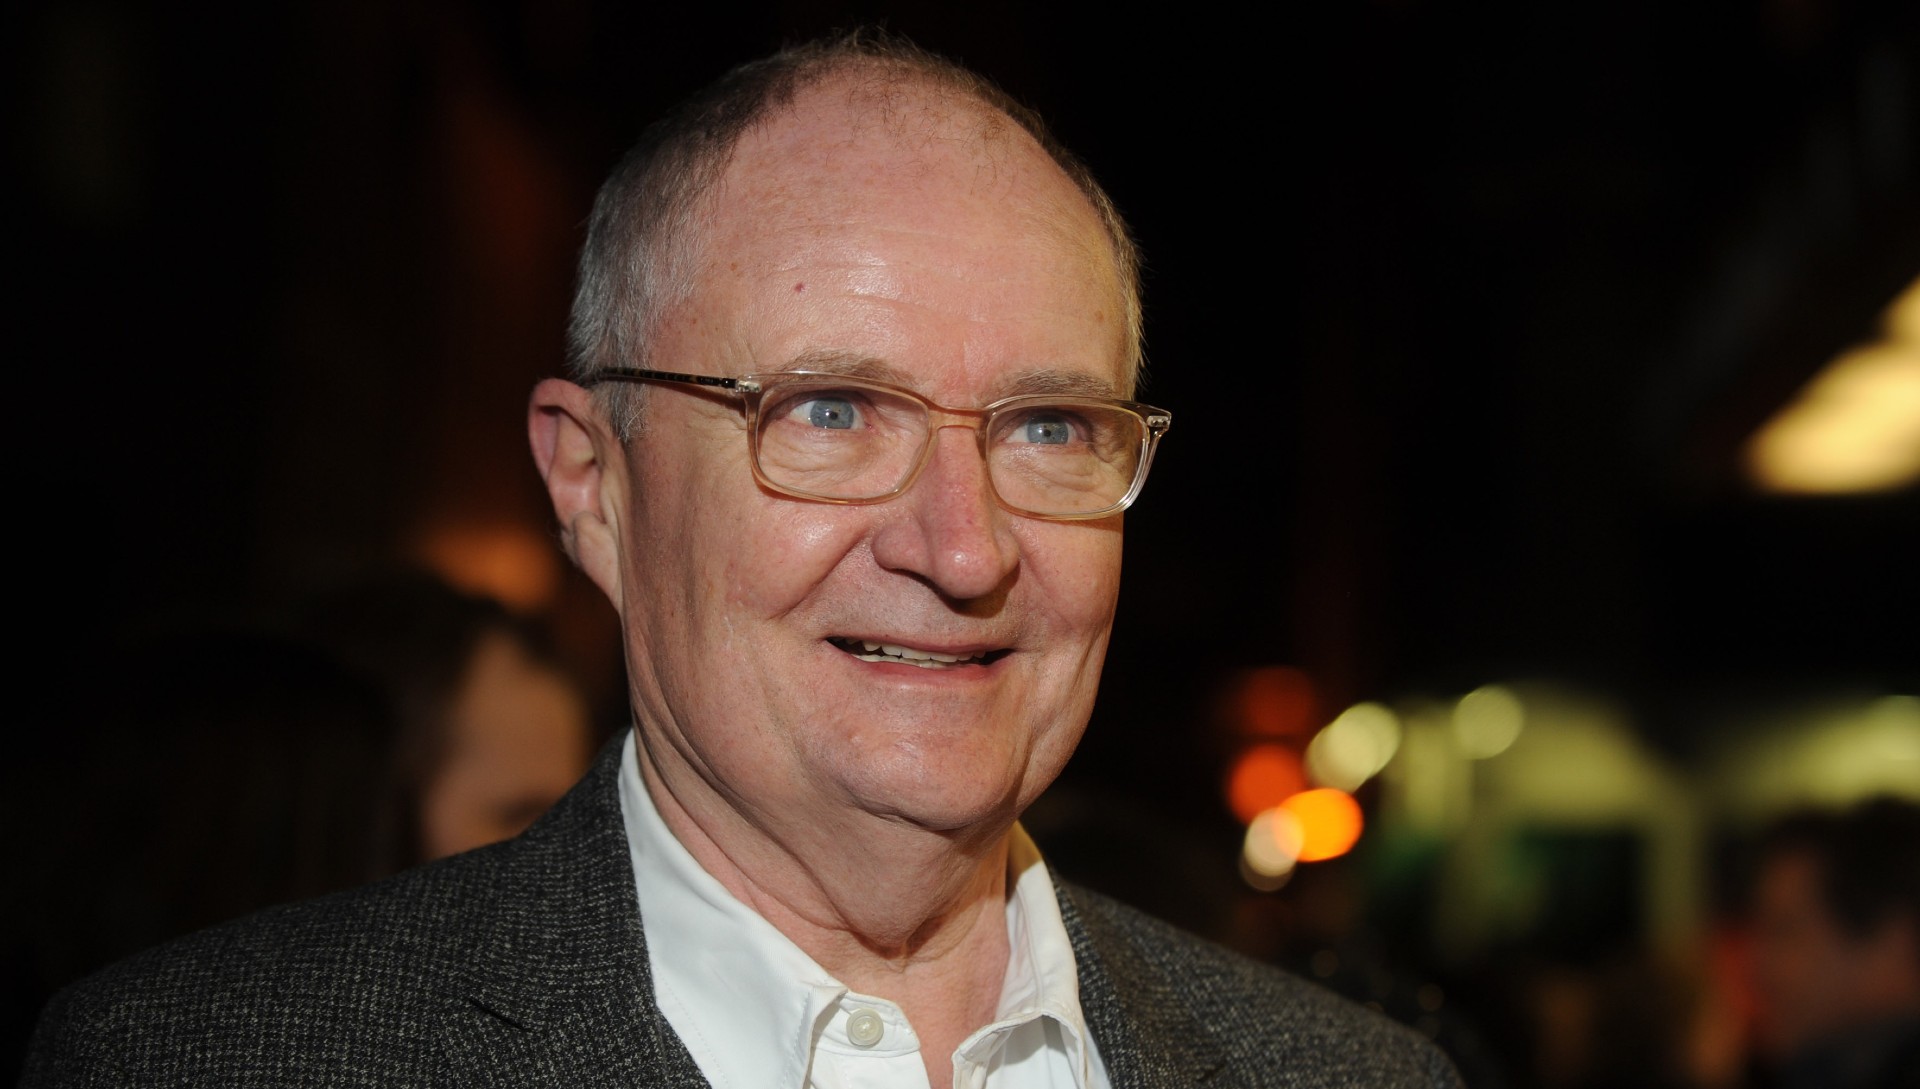 10 Roles That Made Us Love Jim Broadbent: From 'Harry Potter' to 'Moulin Rouge!'